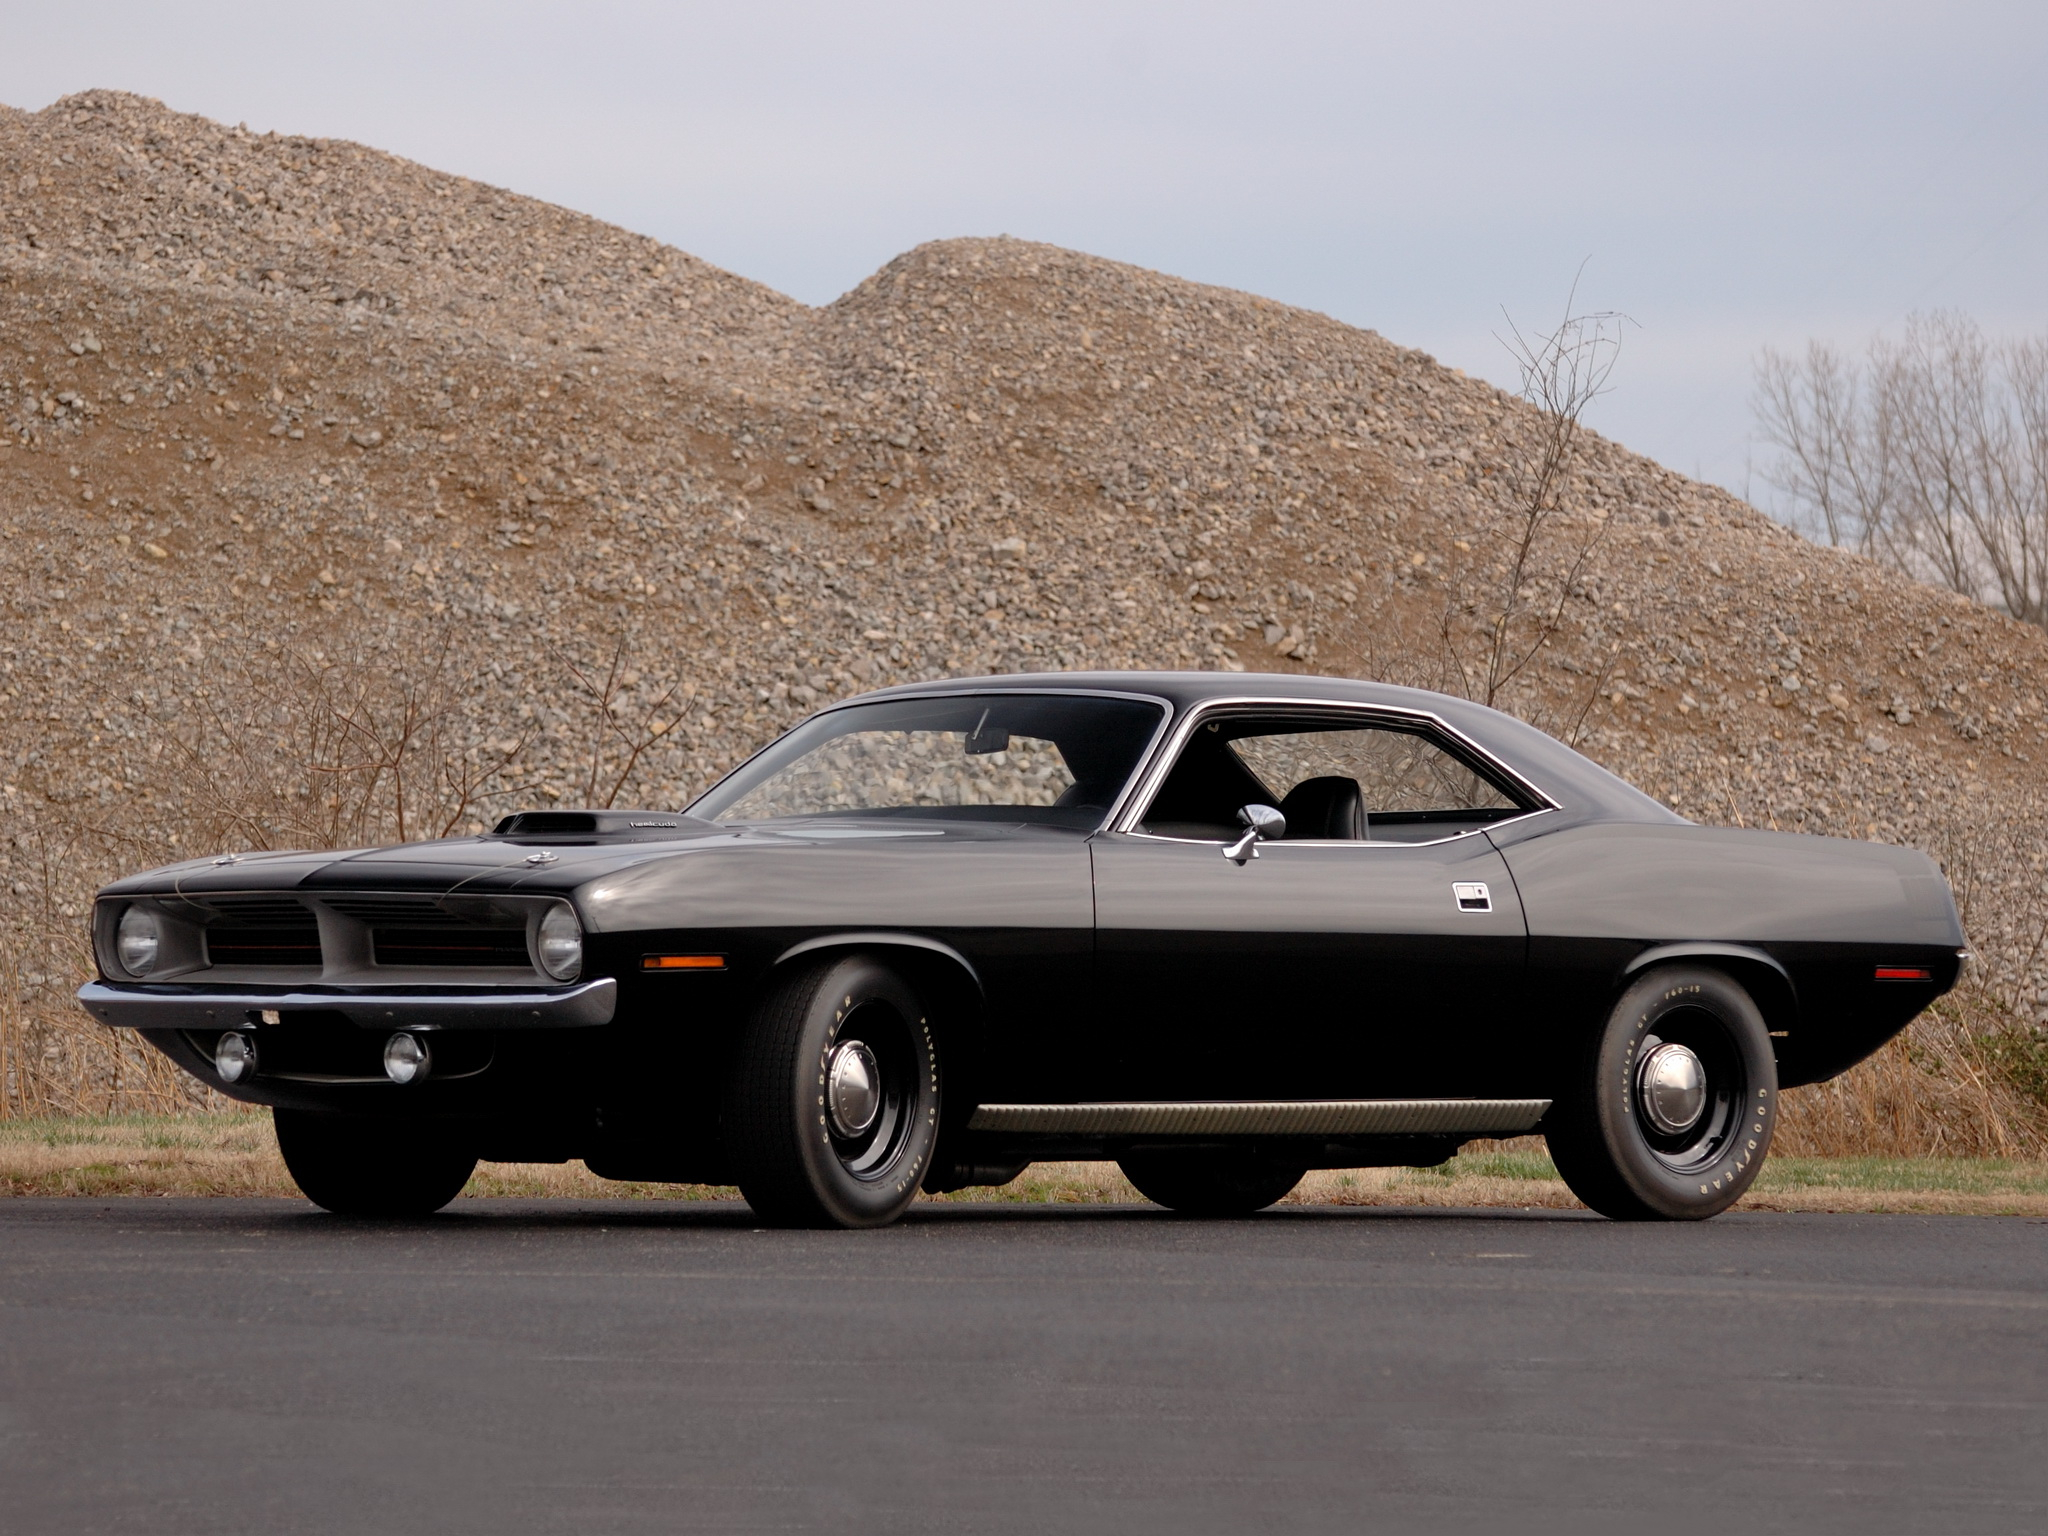 2048x1536 Free download Daily Wallpaper Plymouth Barracuda I Like To Waste My Time [] for your Desktop, Mobile \u0026 Tablet | Explore 41+ 1970 Plymouth Barracuda Wallpaper | 1970 Plymouth Barracuda Wallpaper, Plymouth